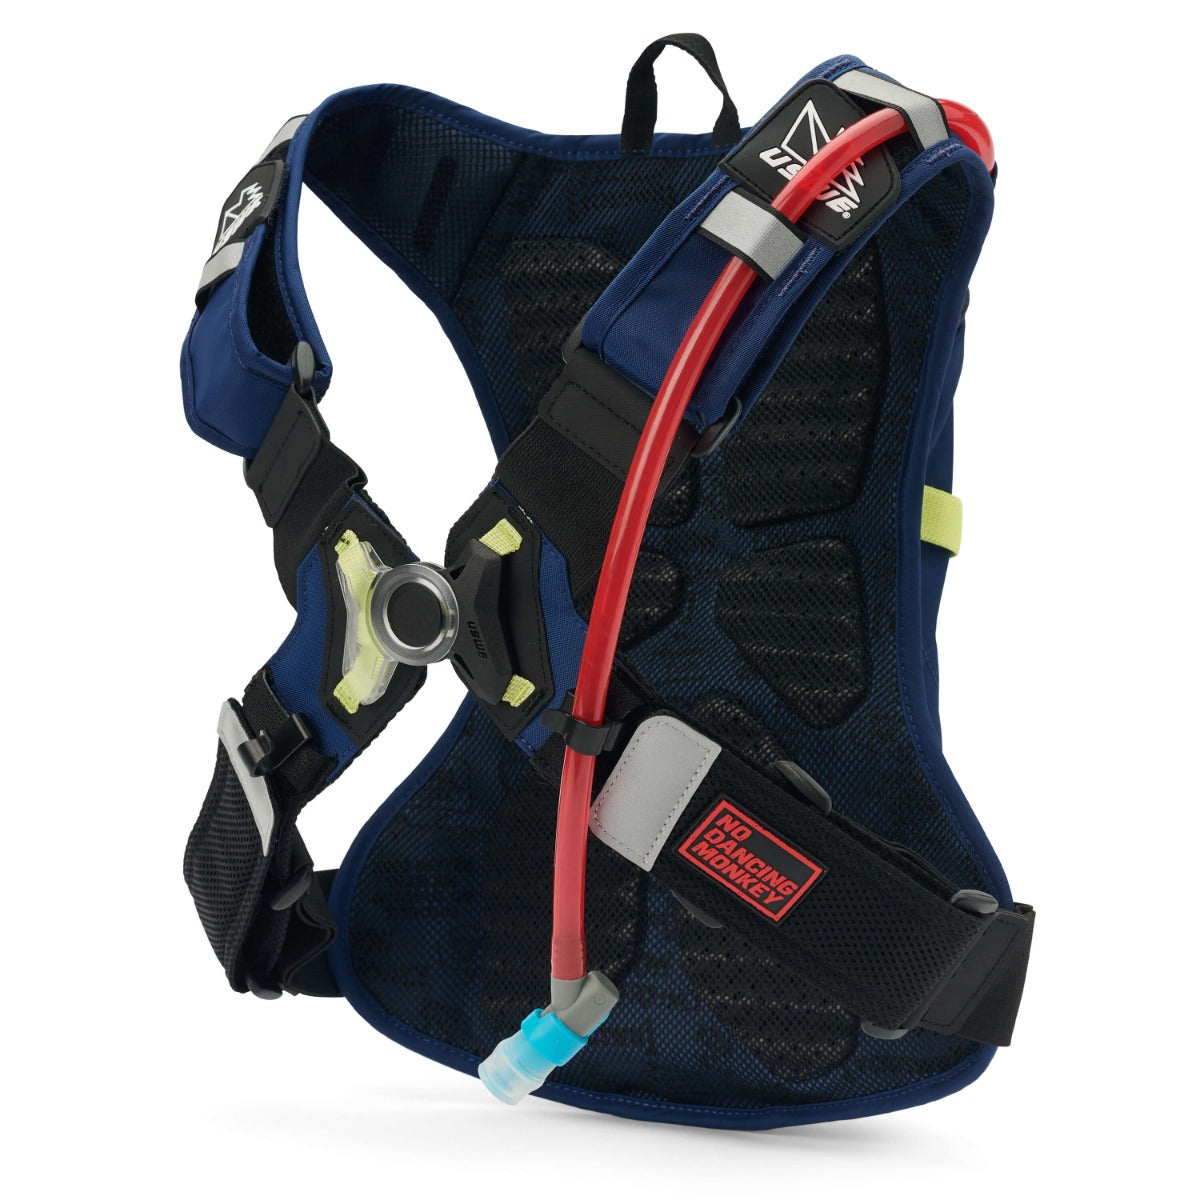 USWE RAW 4 Hydration Backpack Factory Blue – With 3 Litre Bladder